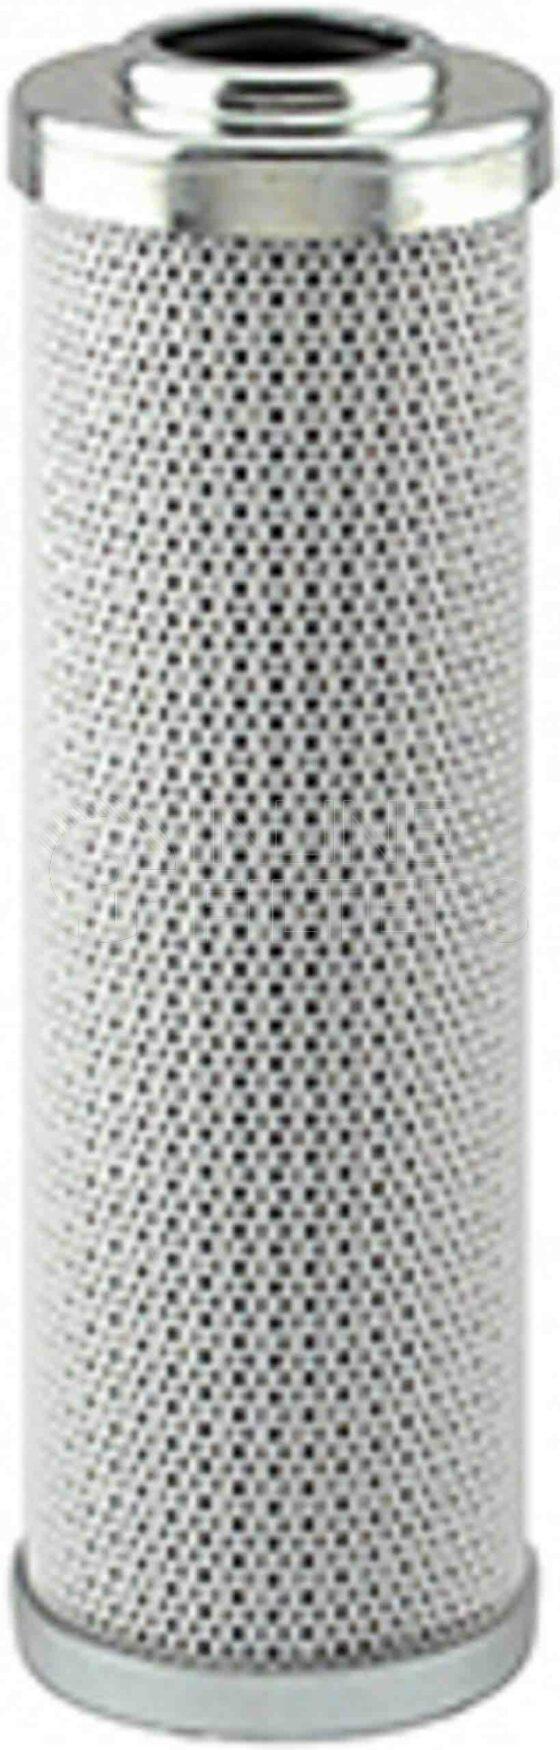 Inline FH52191. Hydraulic Filter Product – Cartridge – O- Ring Product Hydraulic filter product